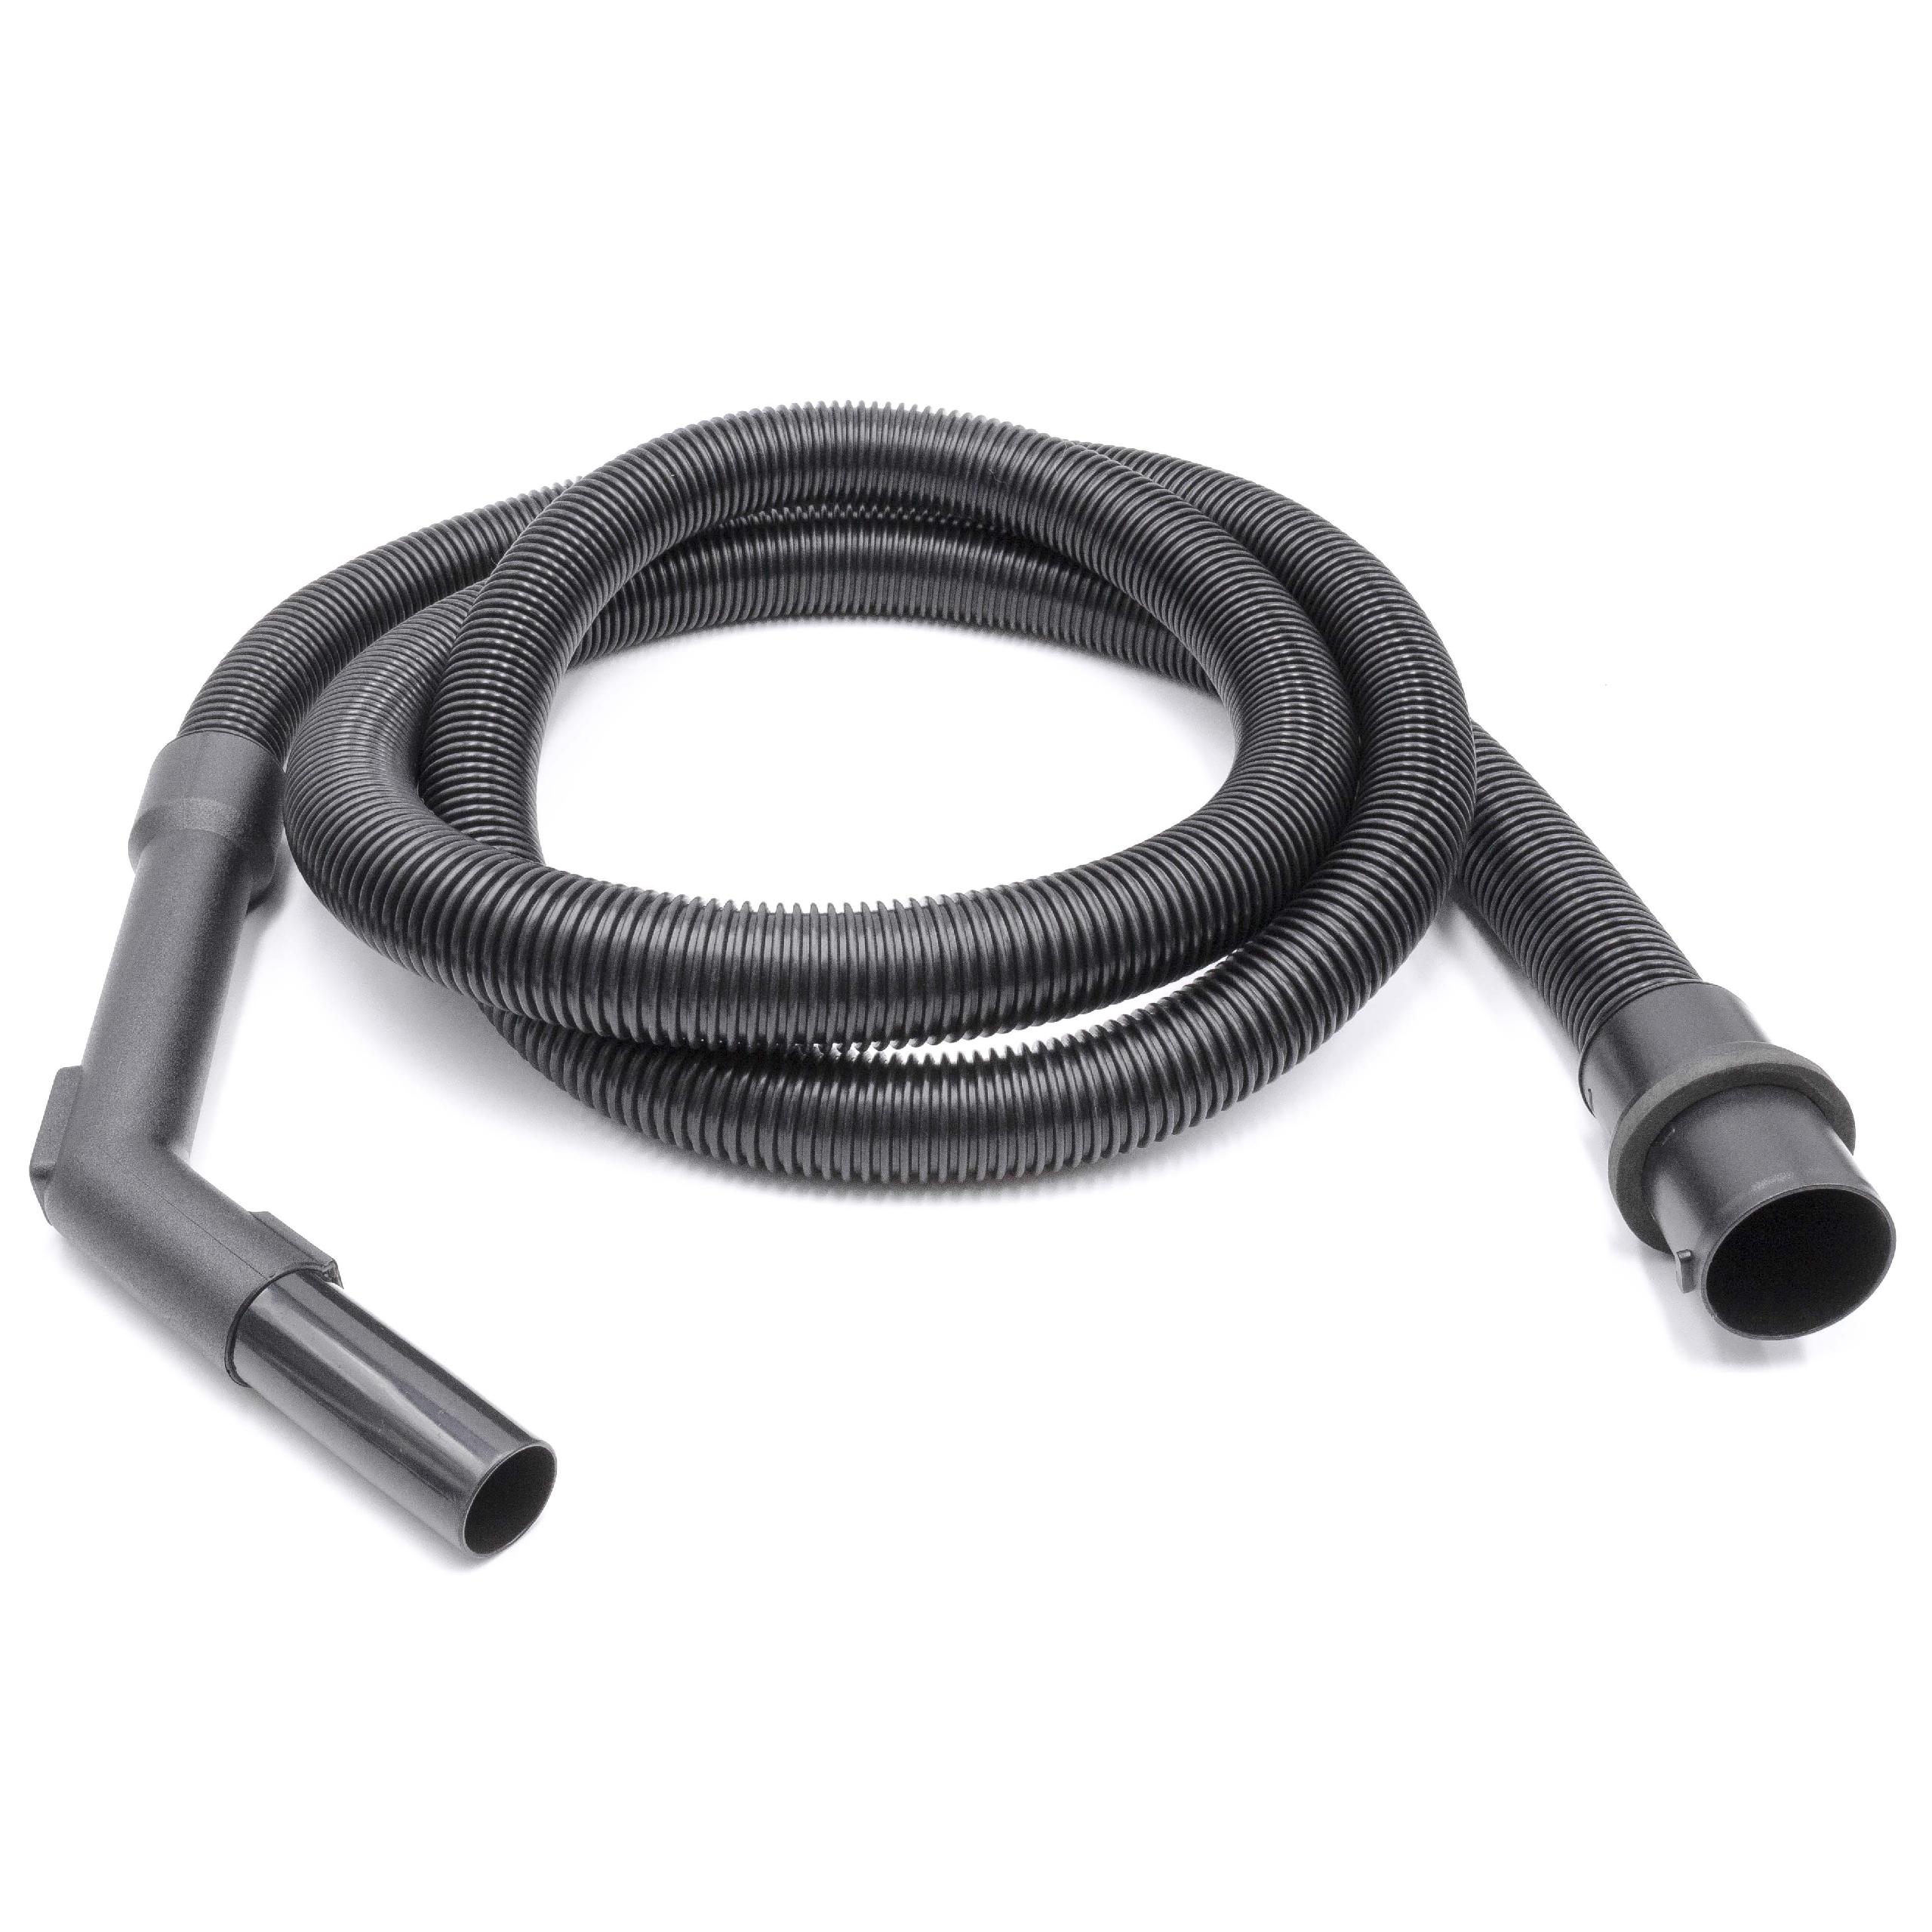 Hose as Replacement for Kärcher 4.440-626.0, 4.440-948.0 - Incl. Handle with Air Regulator, 3 m long